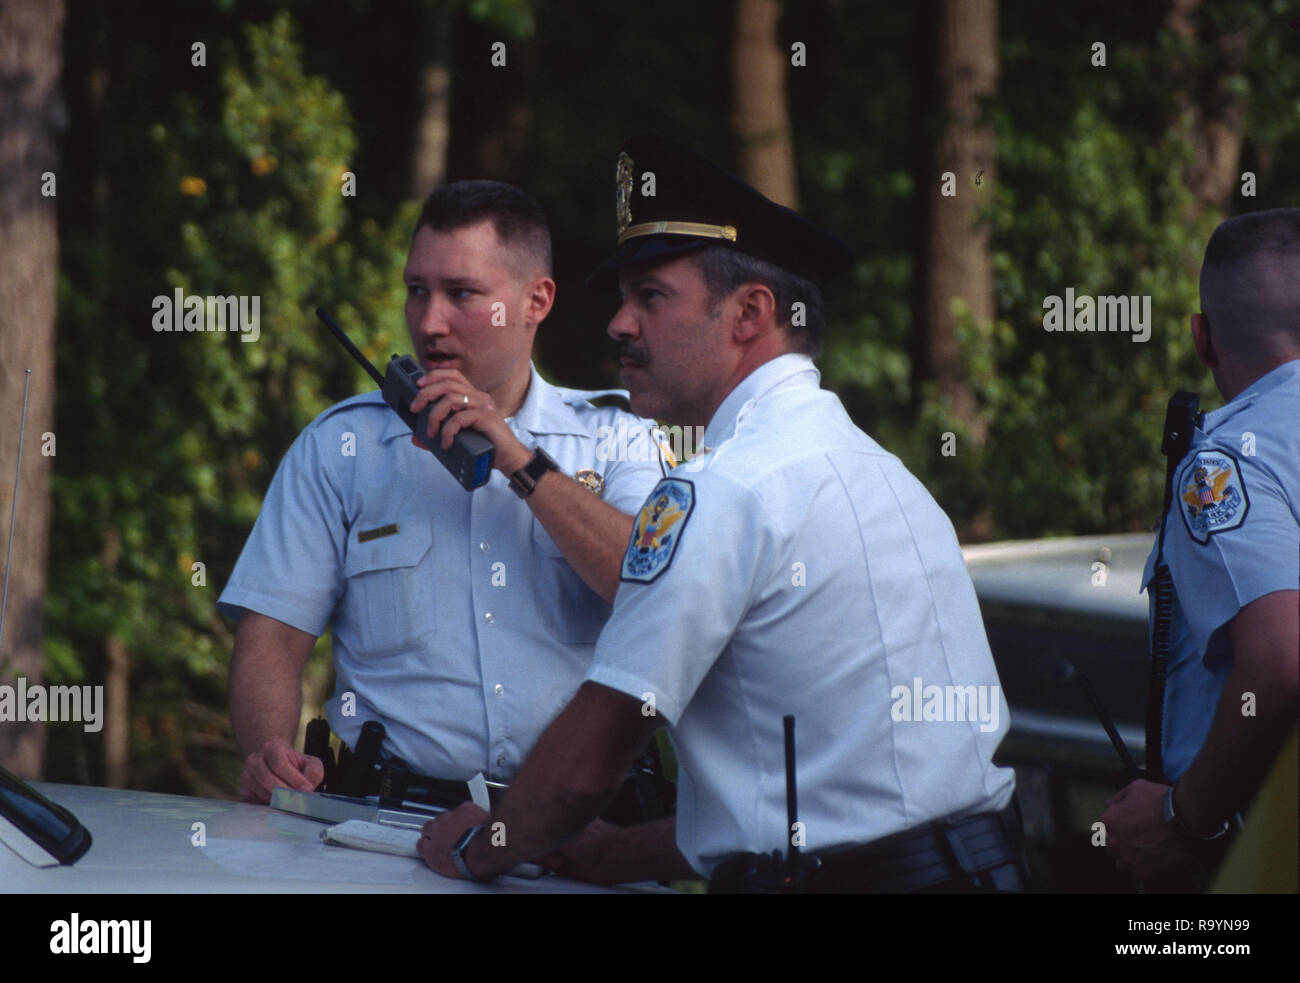 Two policemen one talking on the radio at the scene of an emergency Stock Photo